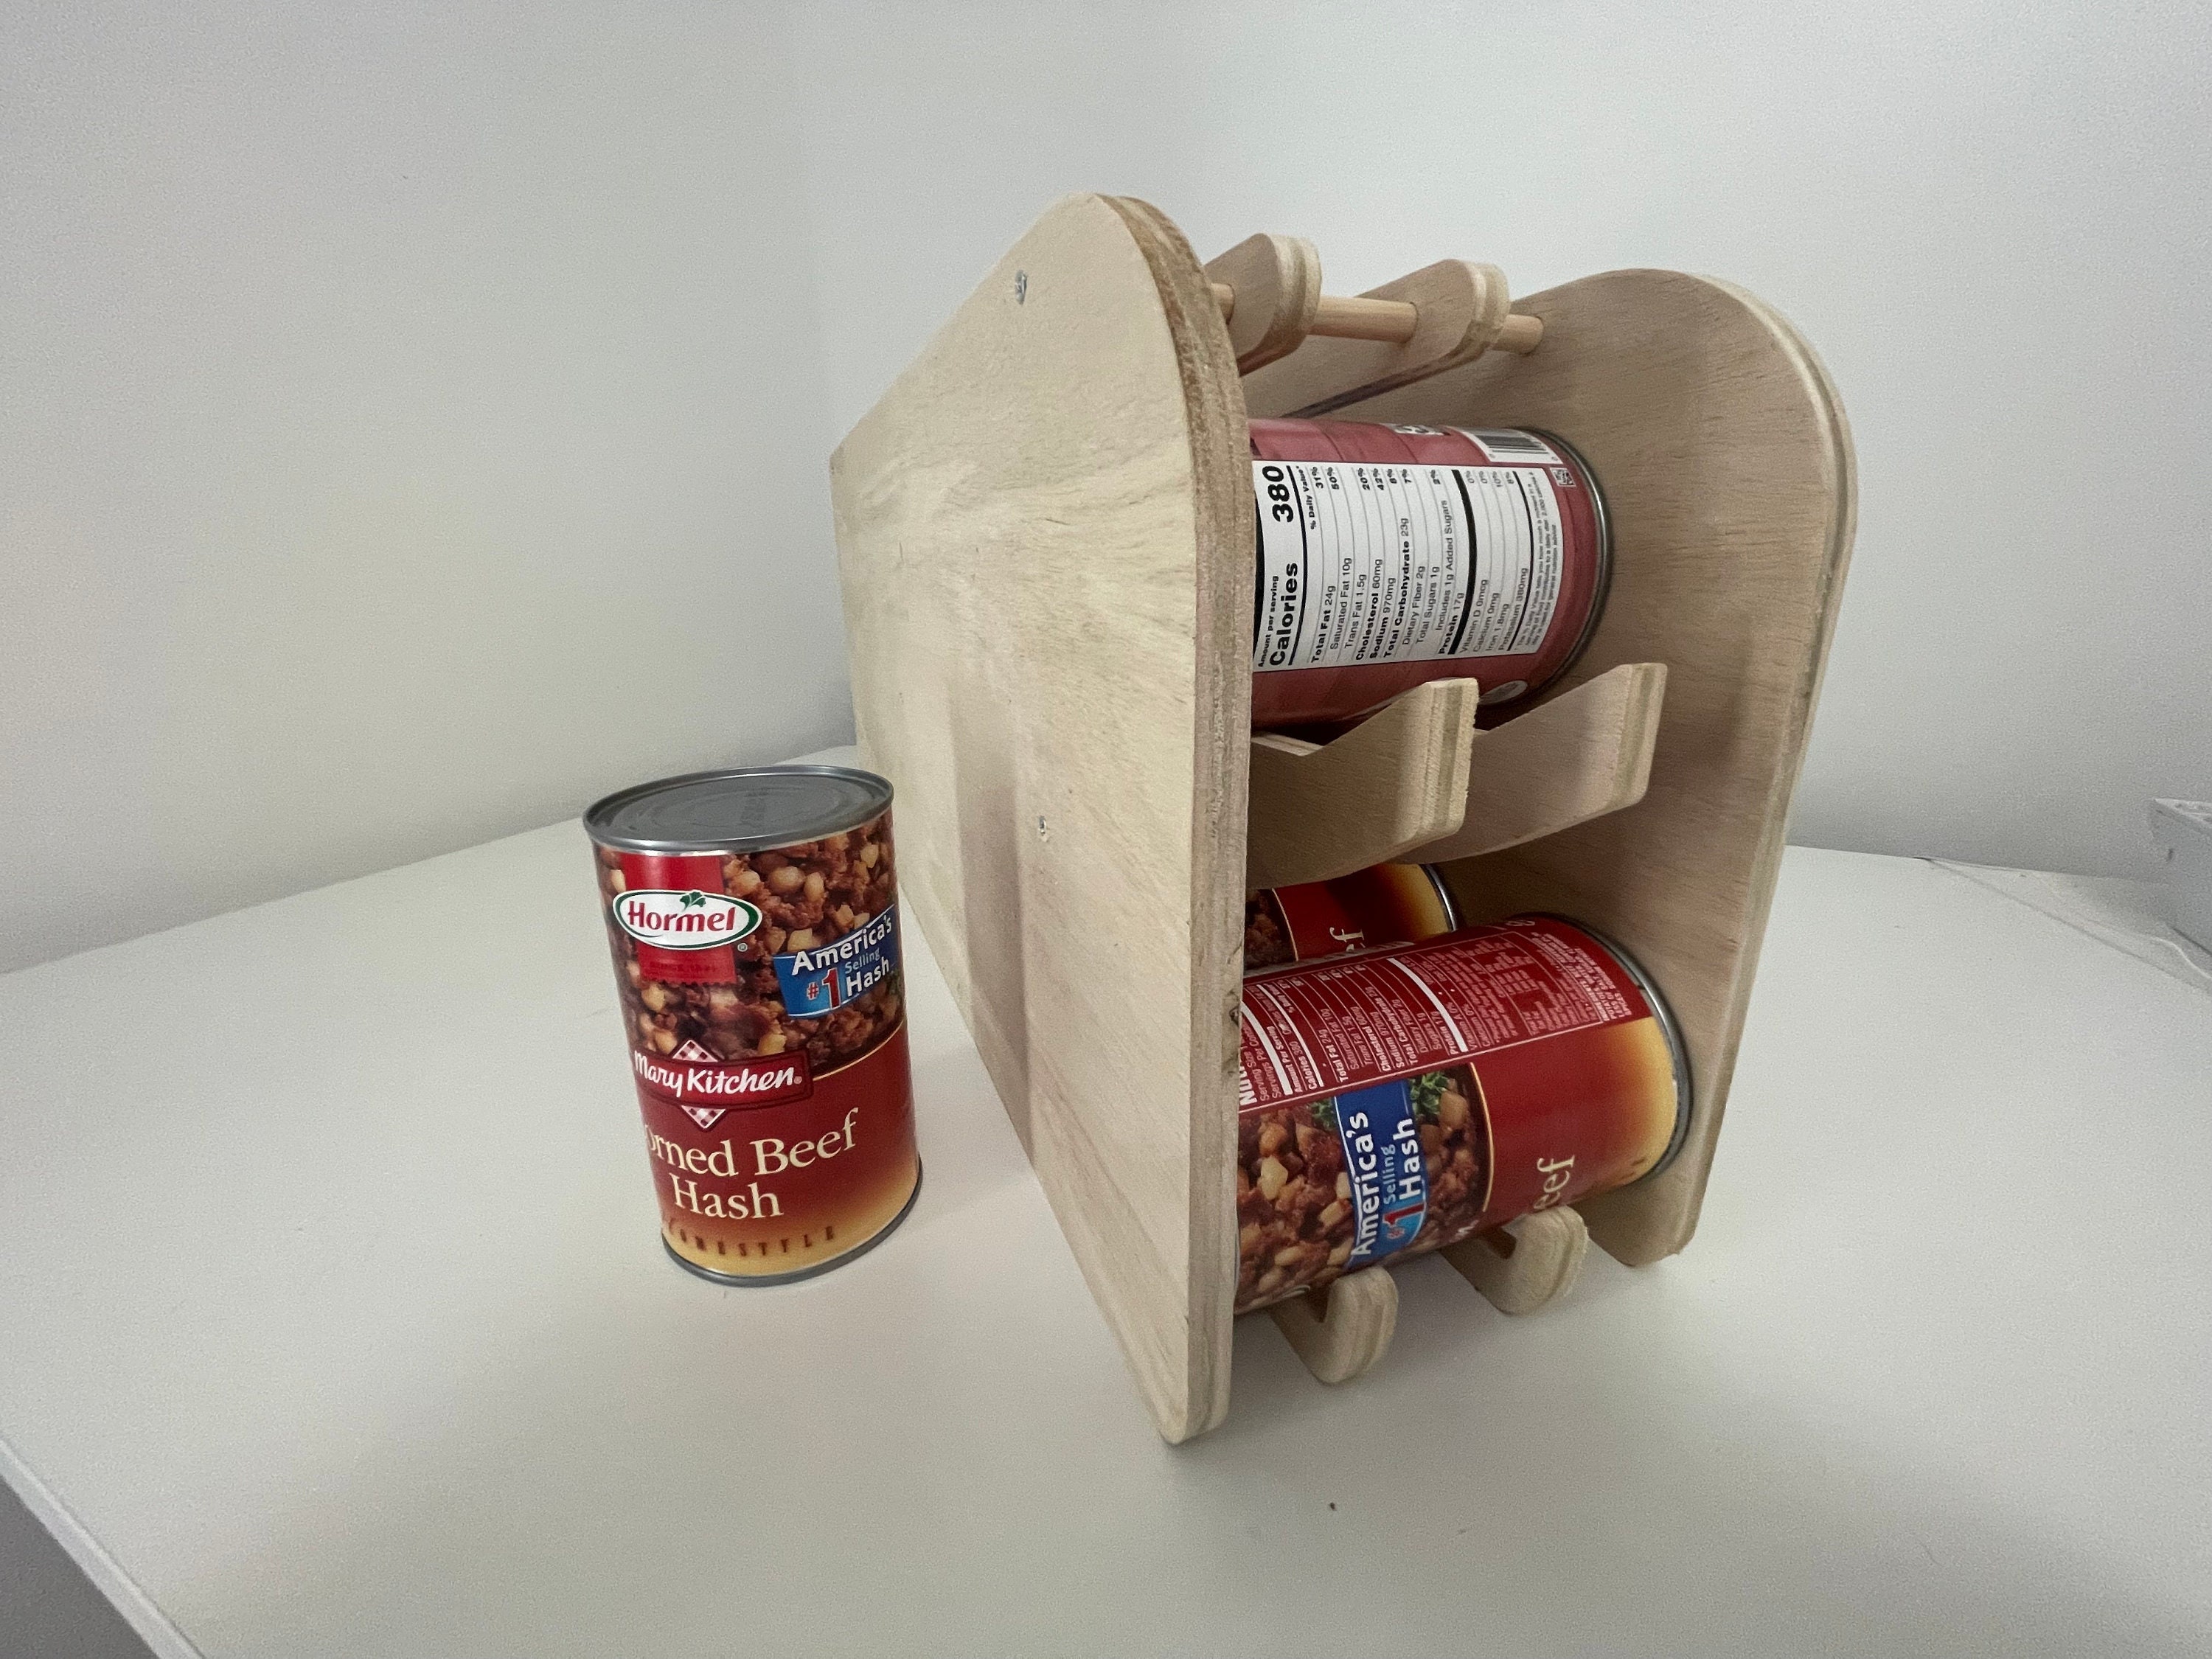 3D Printed FIFO Rolling Can Pantry Organizer by rebeltaz